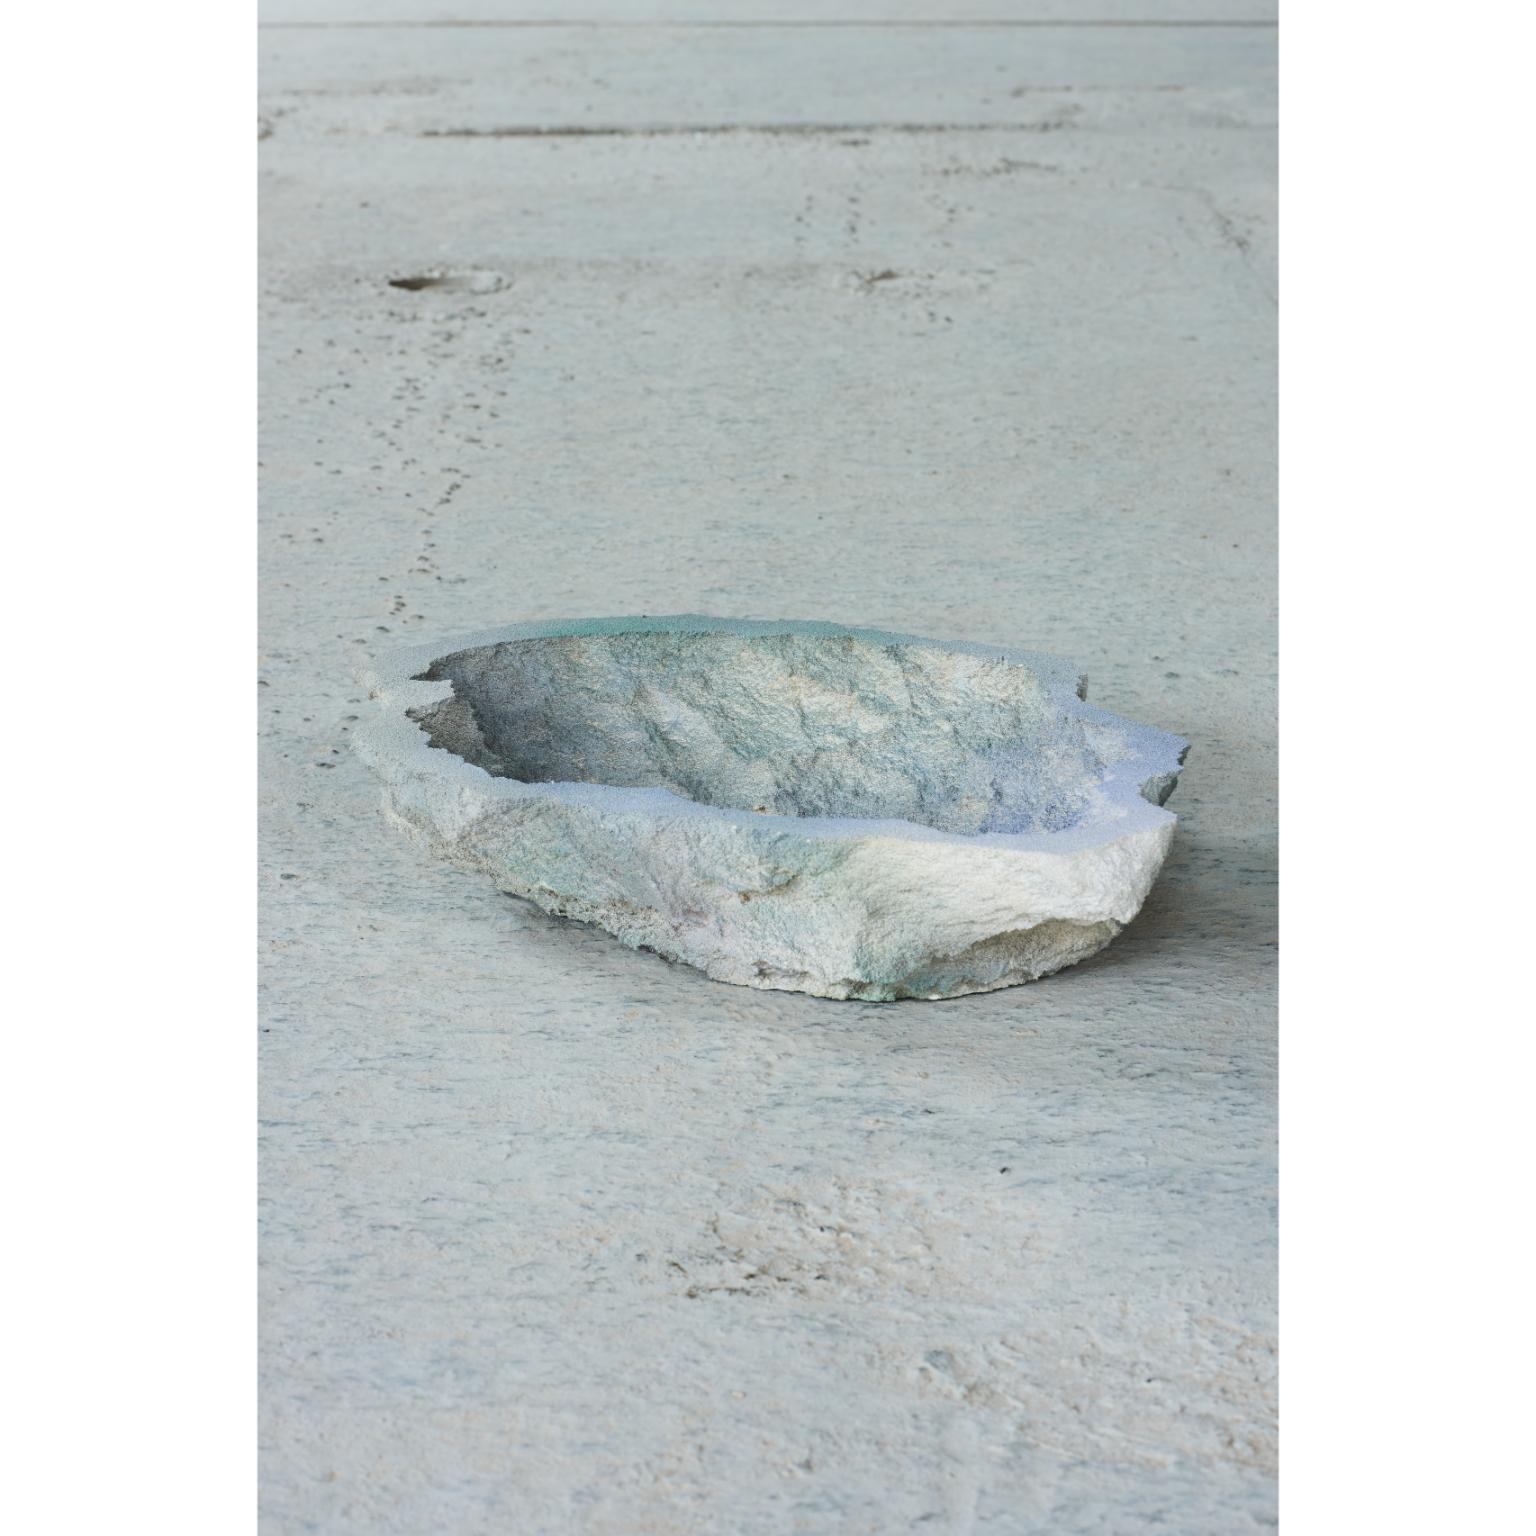 Rock Pond bowl by Andredottir & Bobek
Dimensions: W 11 x H 35 cm
Materials: Reused Foam/mattress and Jesmontite Hardner in Color Gray Fade.

Artificial Nature is a collaboration between the artist and design duo Josephine Andredottir and Emilie